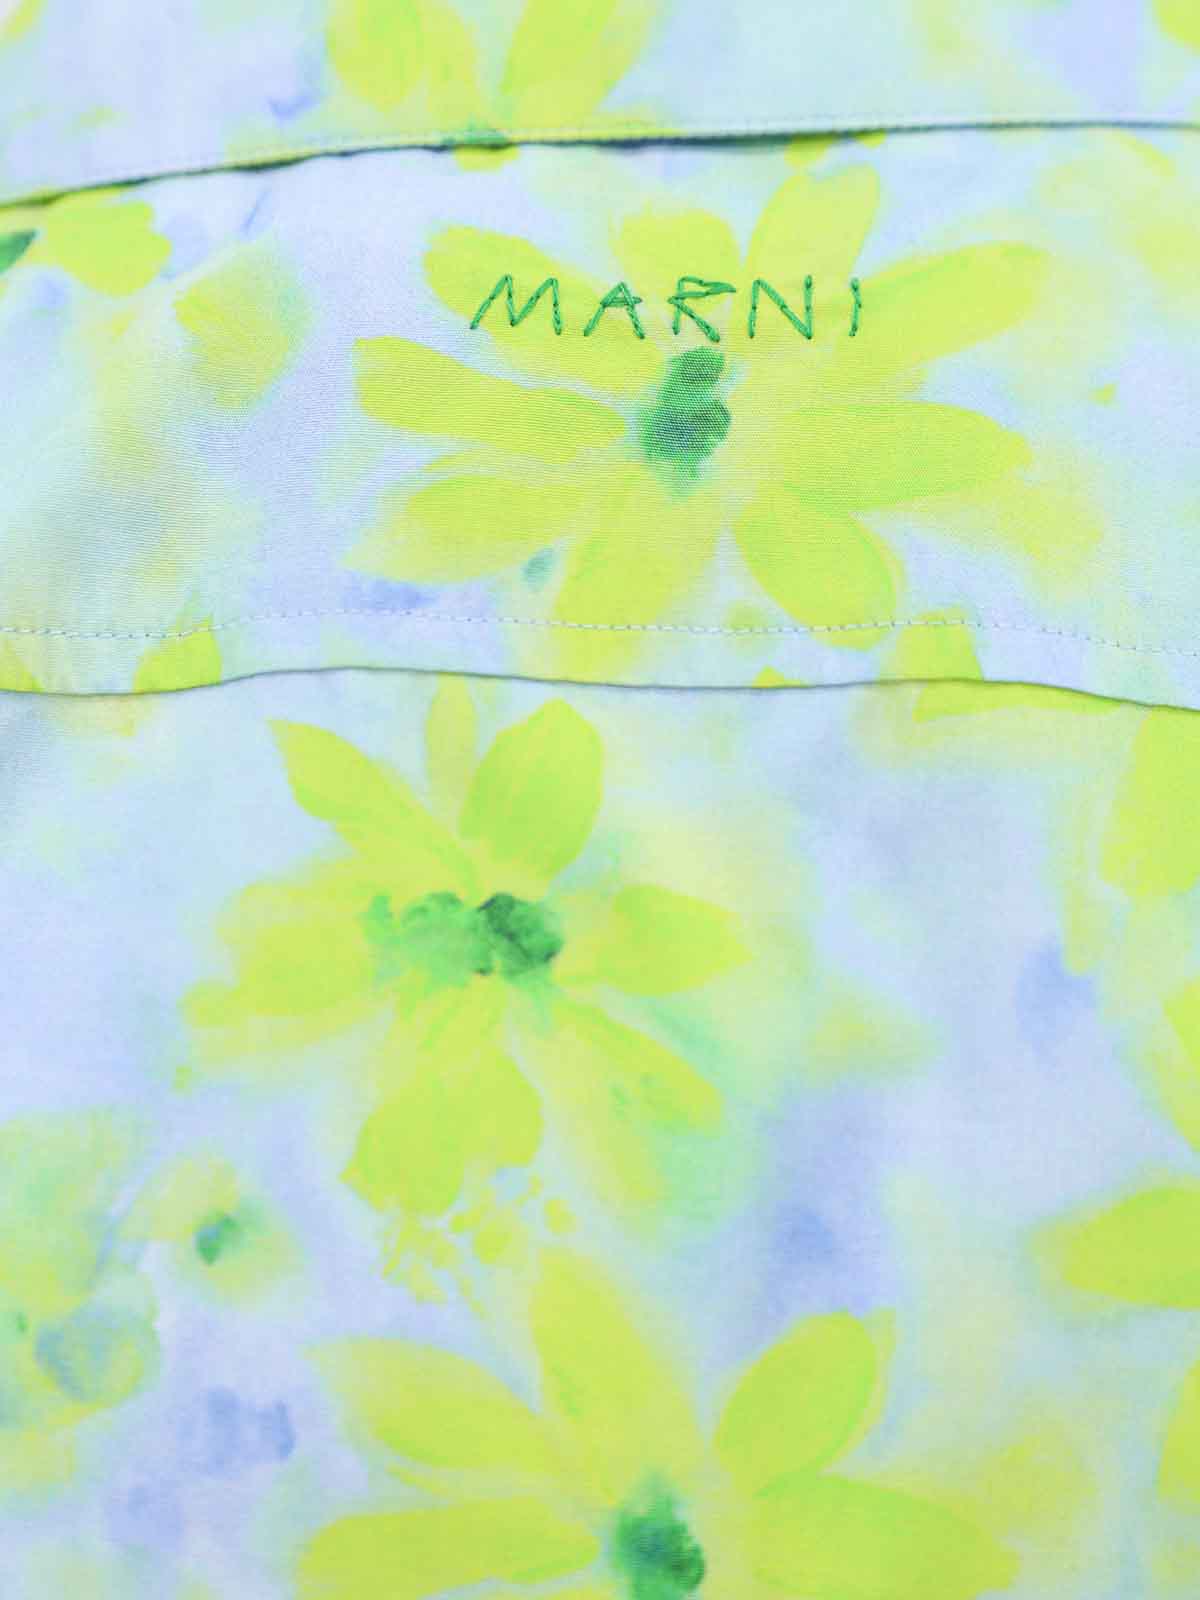 Shop Marni Cotton Shirt With Floral Motif In Blue